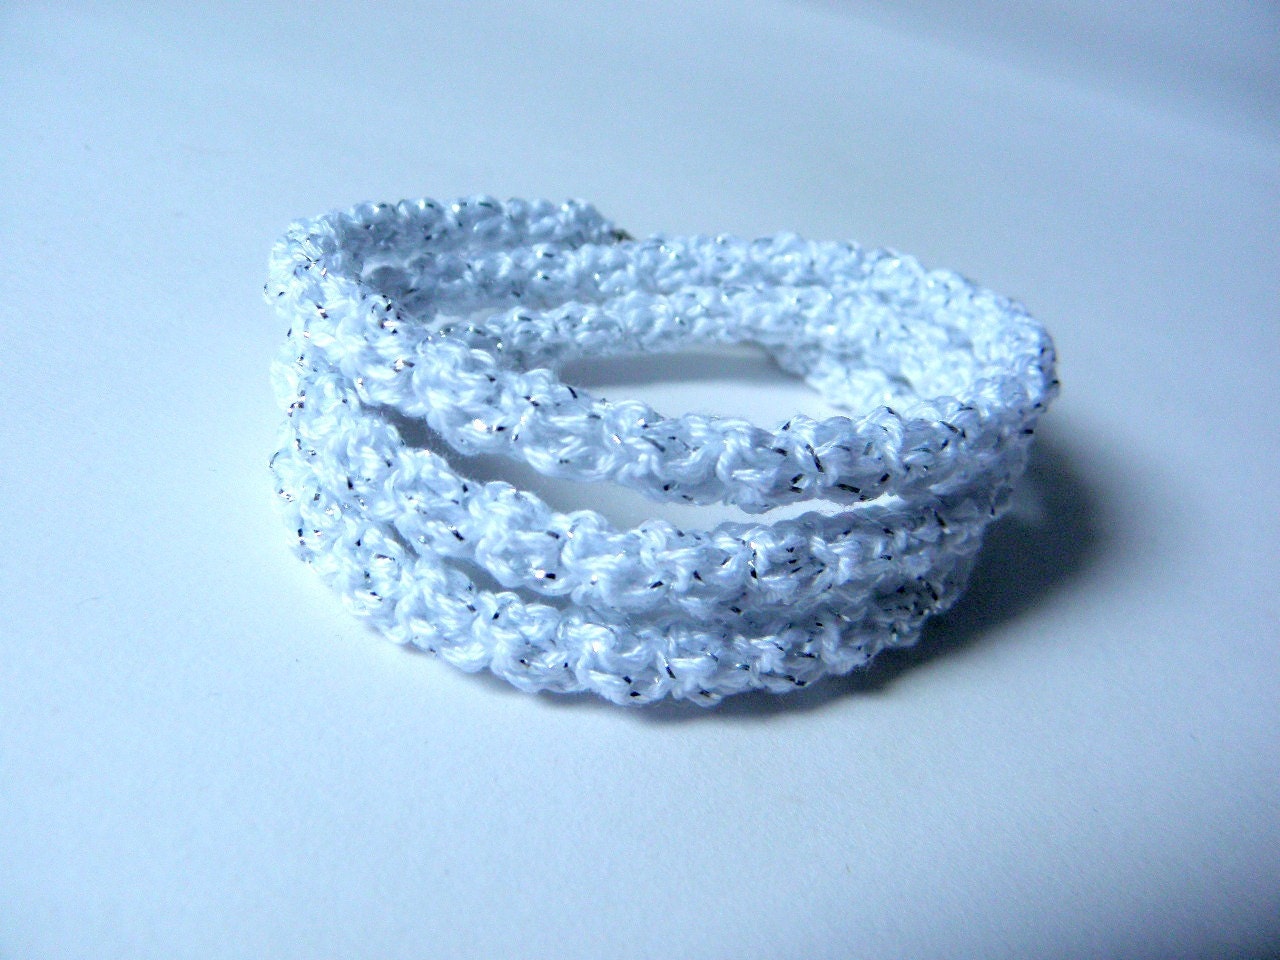 Crochet bracelet made of white cotton and silver metal wire